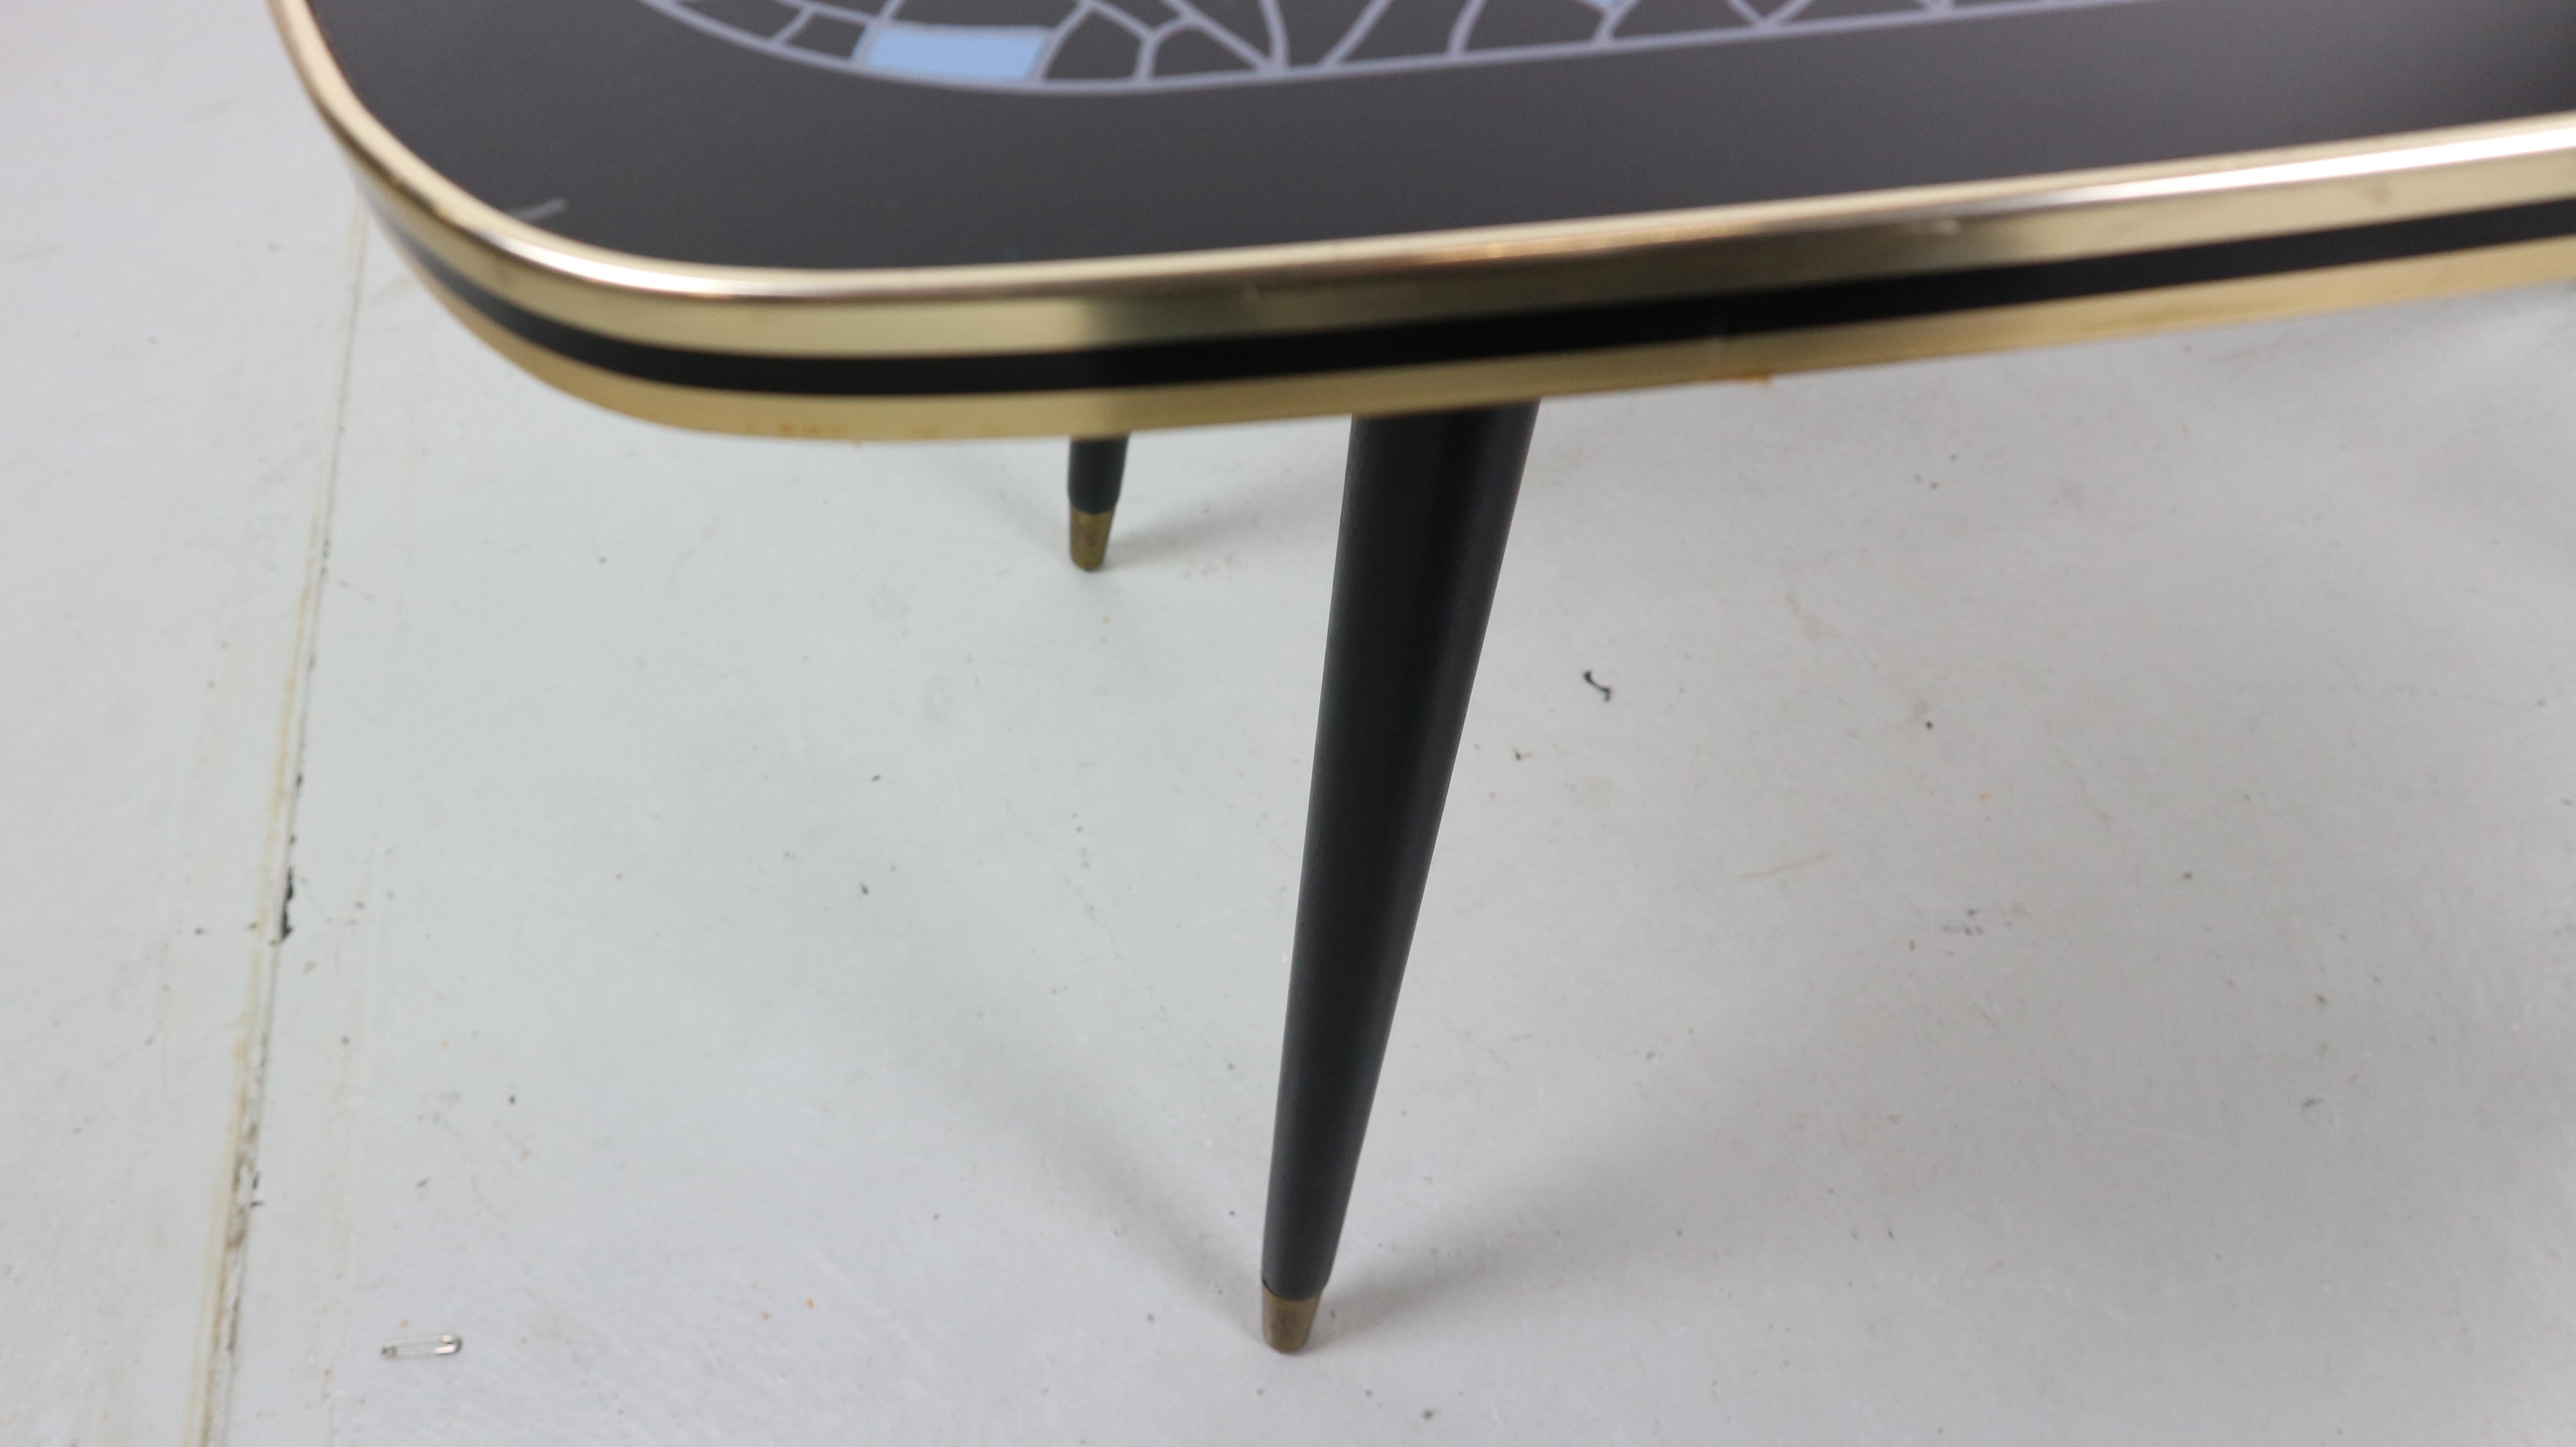 Mid-20th Century Cocktail Table 1950s Atomic Graphic Design Tabletop and Brass Feet